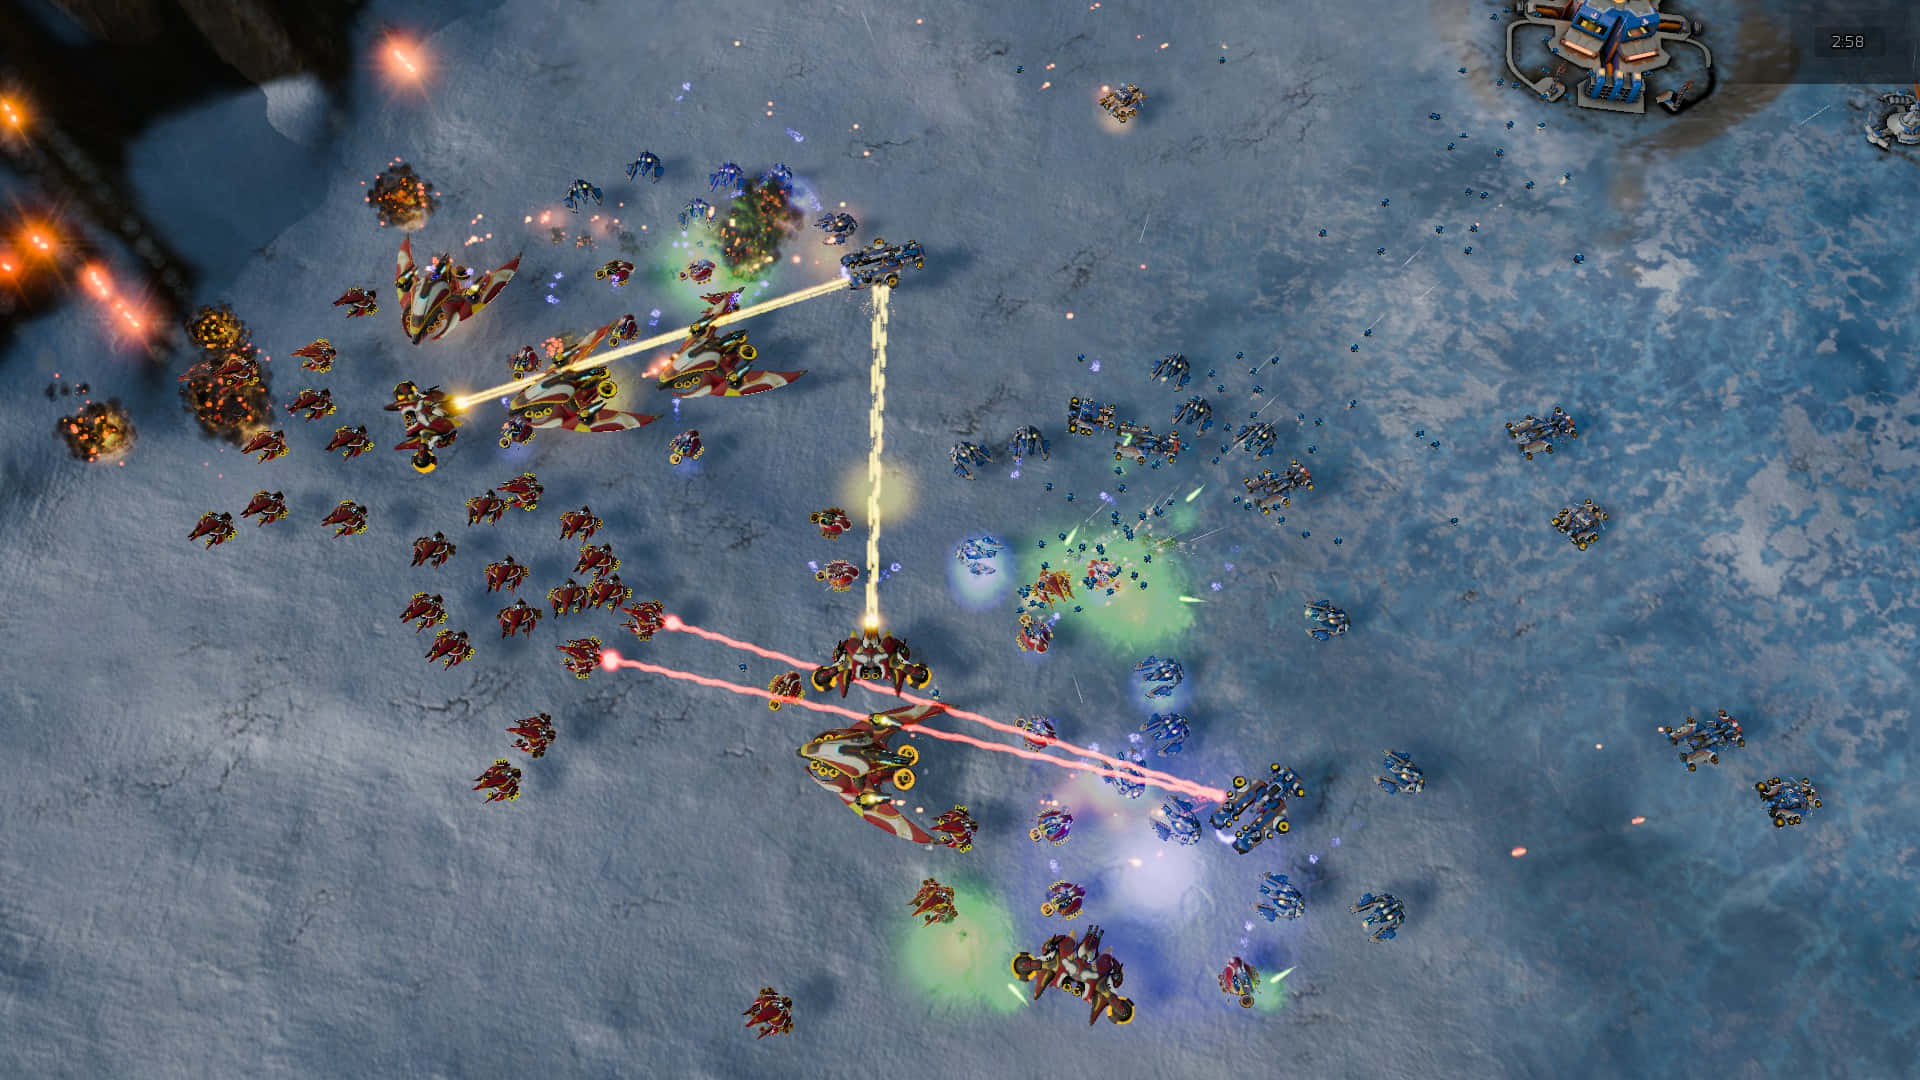 Epic 1920x1080 Ashes Of The Singularity Escalation Game Wallpaper